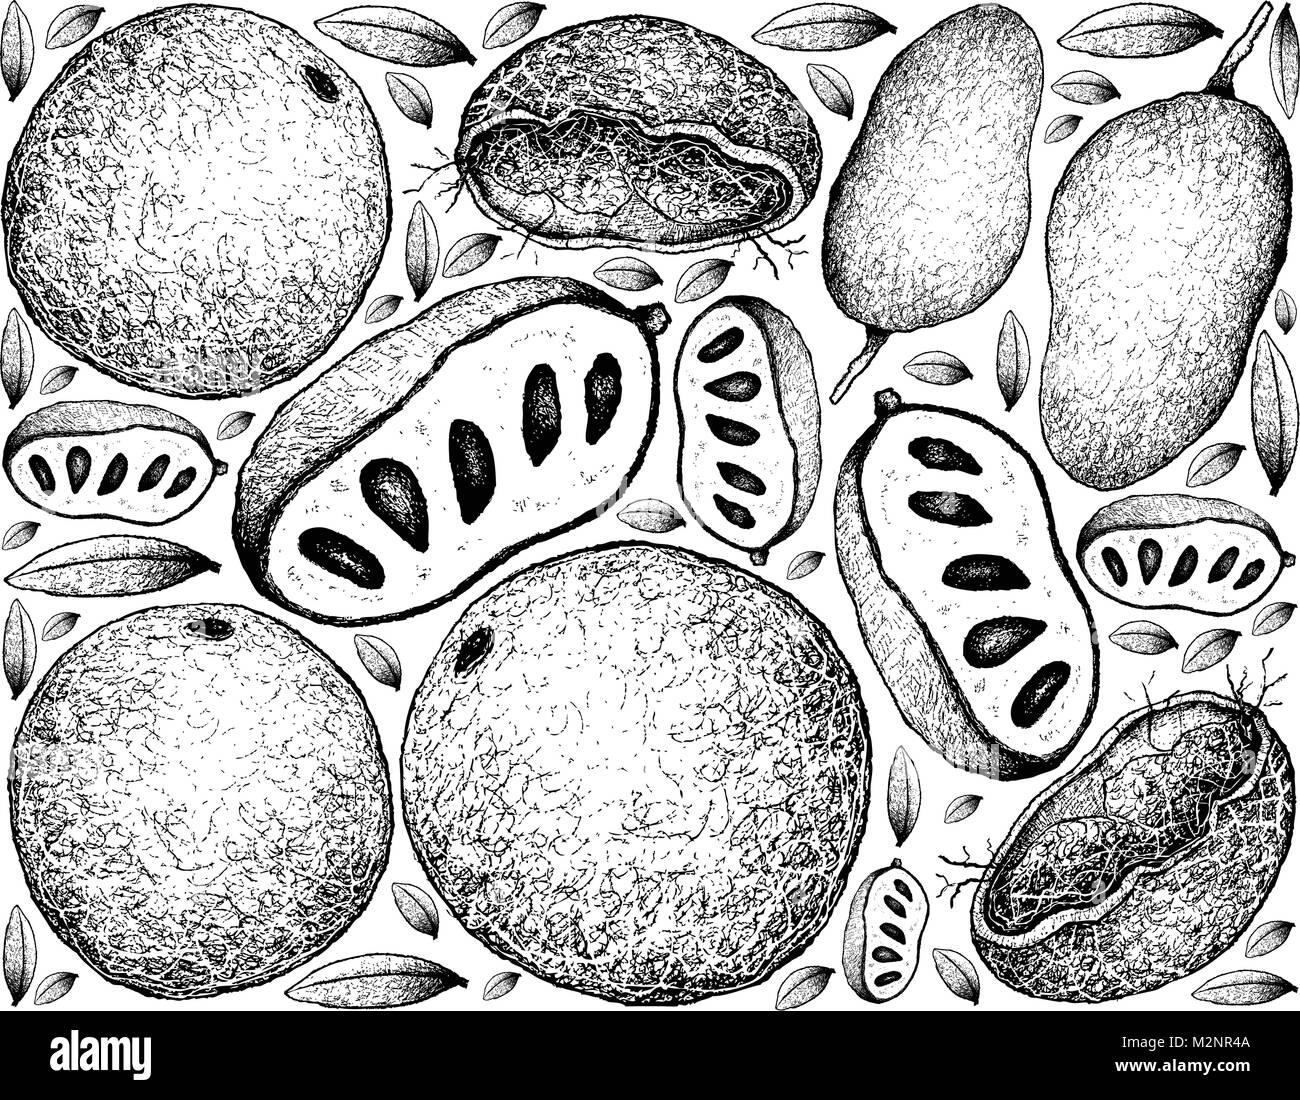 Tropical Fruits, Illustration Background of Hand Drawn Sketch Fresh Wood Apple or Limonia Acidissima and Paw Paw or Asimina Triloba Fruits. Stock Vector